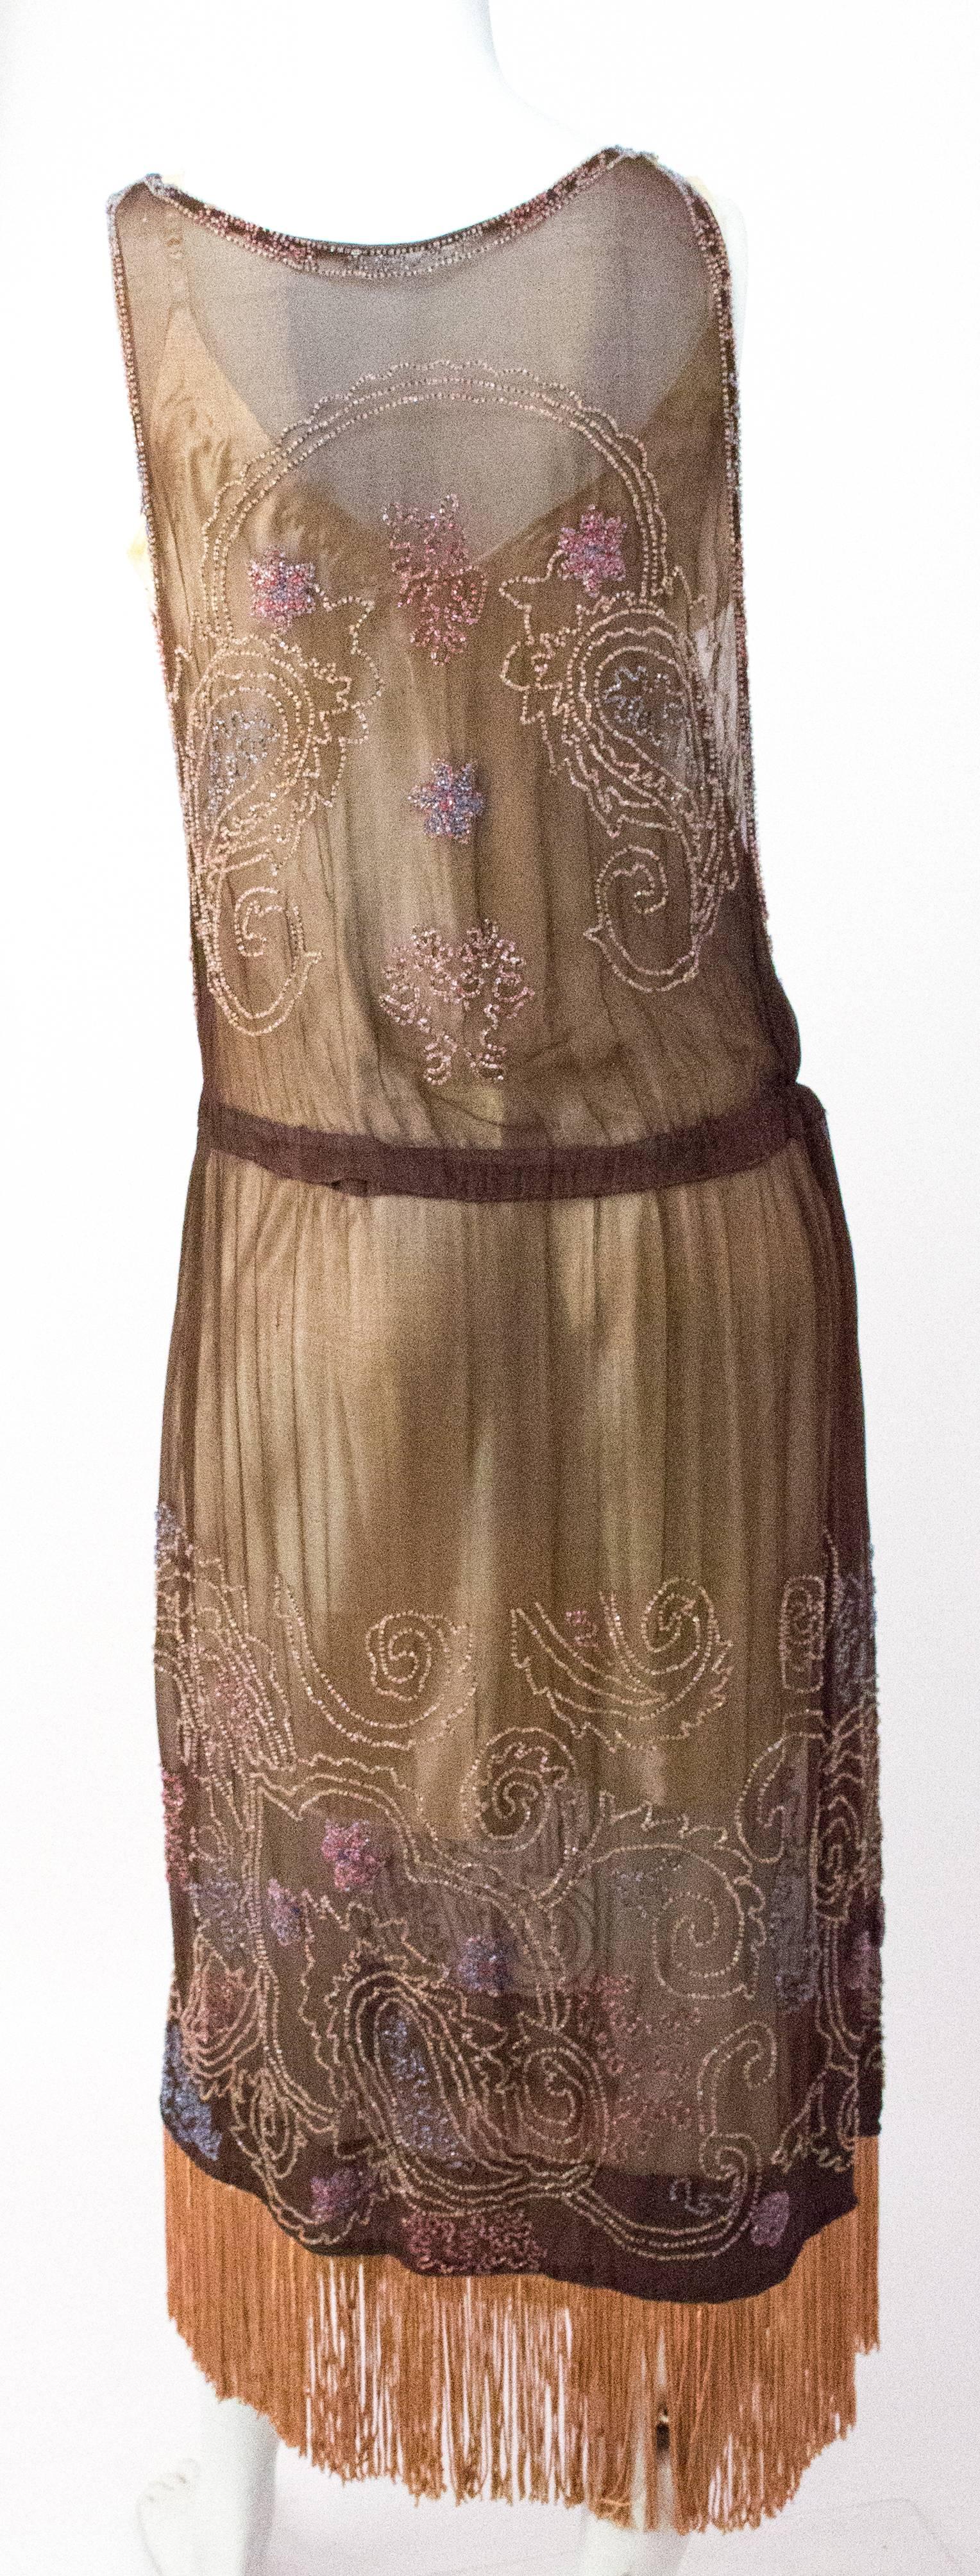 20s Brown Chiffon Dress with Peach Beading & Fringe. Elastic in waist. Unlined. 